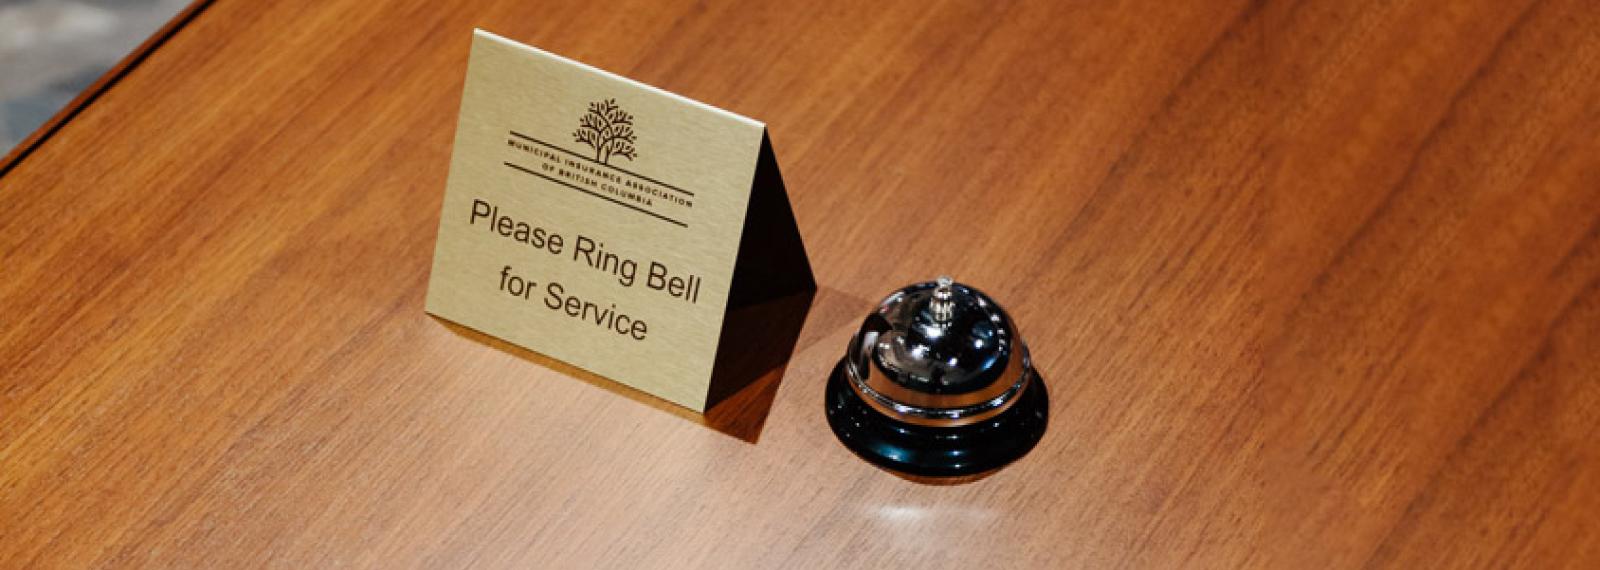 Ring bell for service